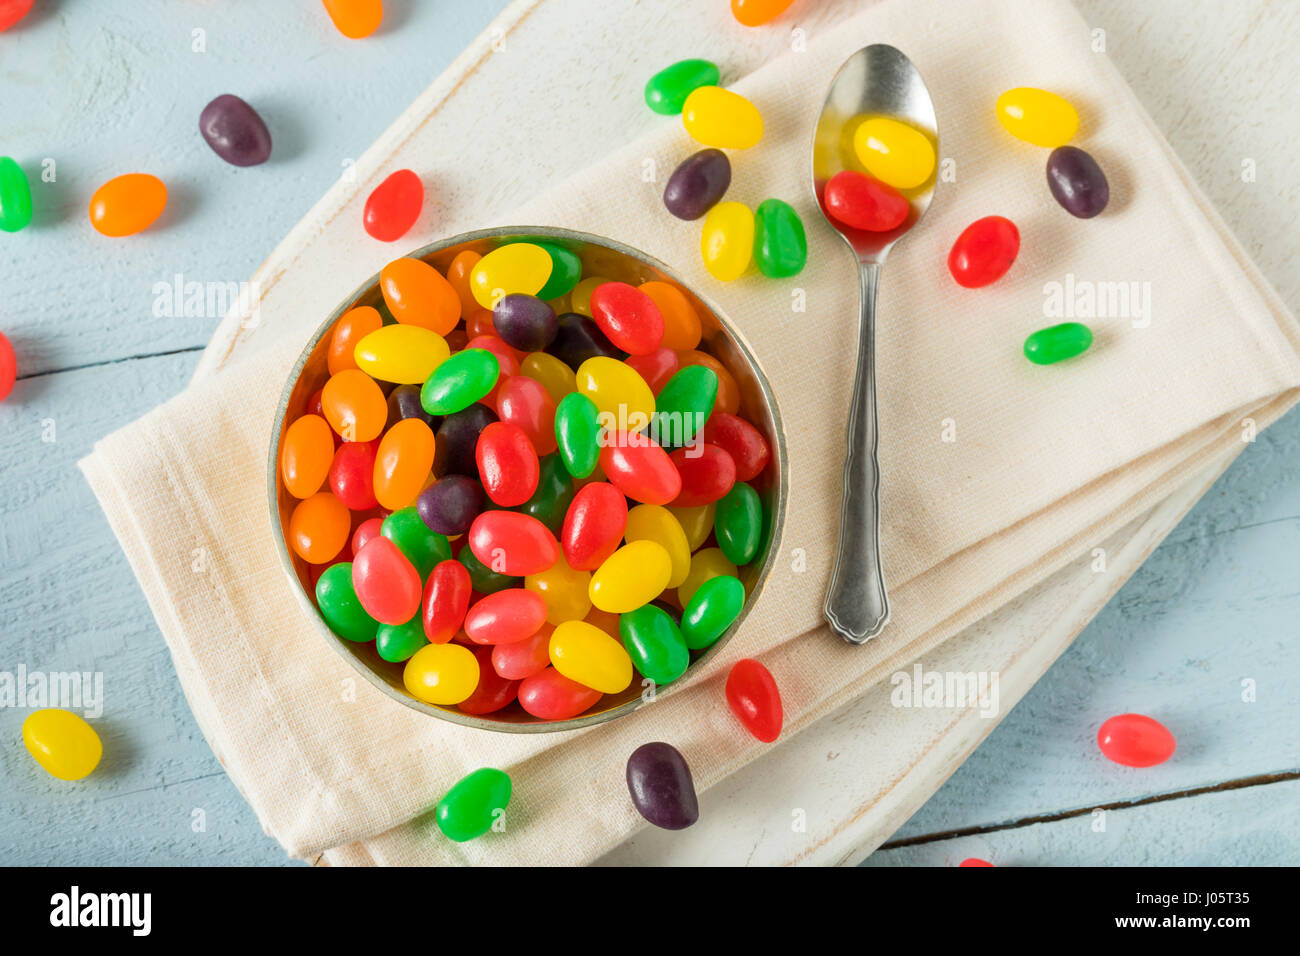 Dolce gommose jelly bean Candy in una ciotola Foto Stock